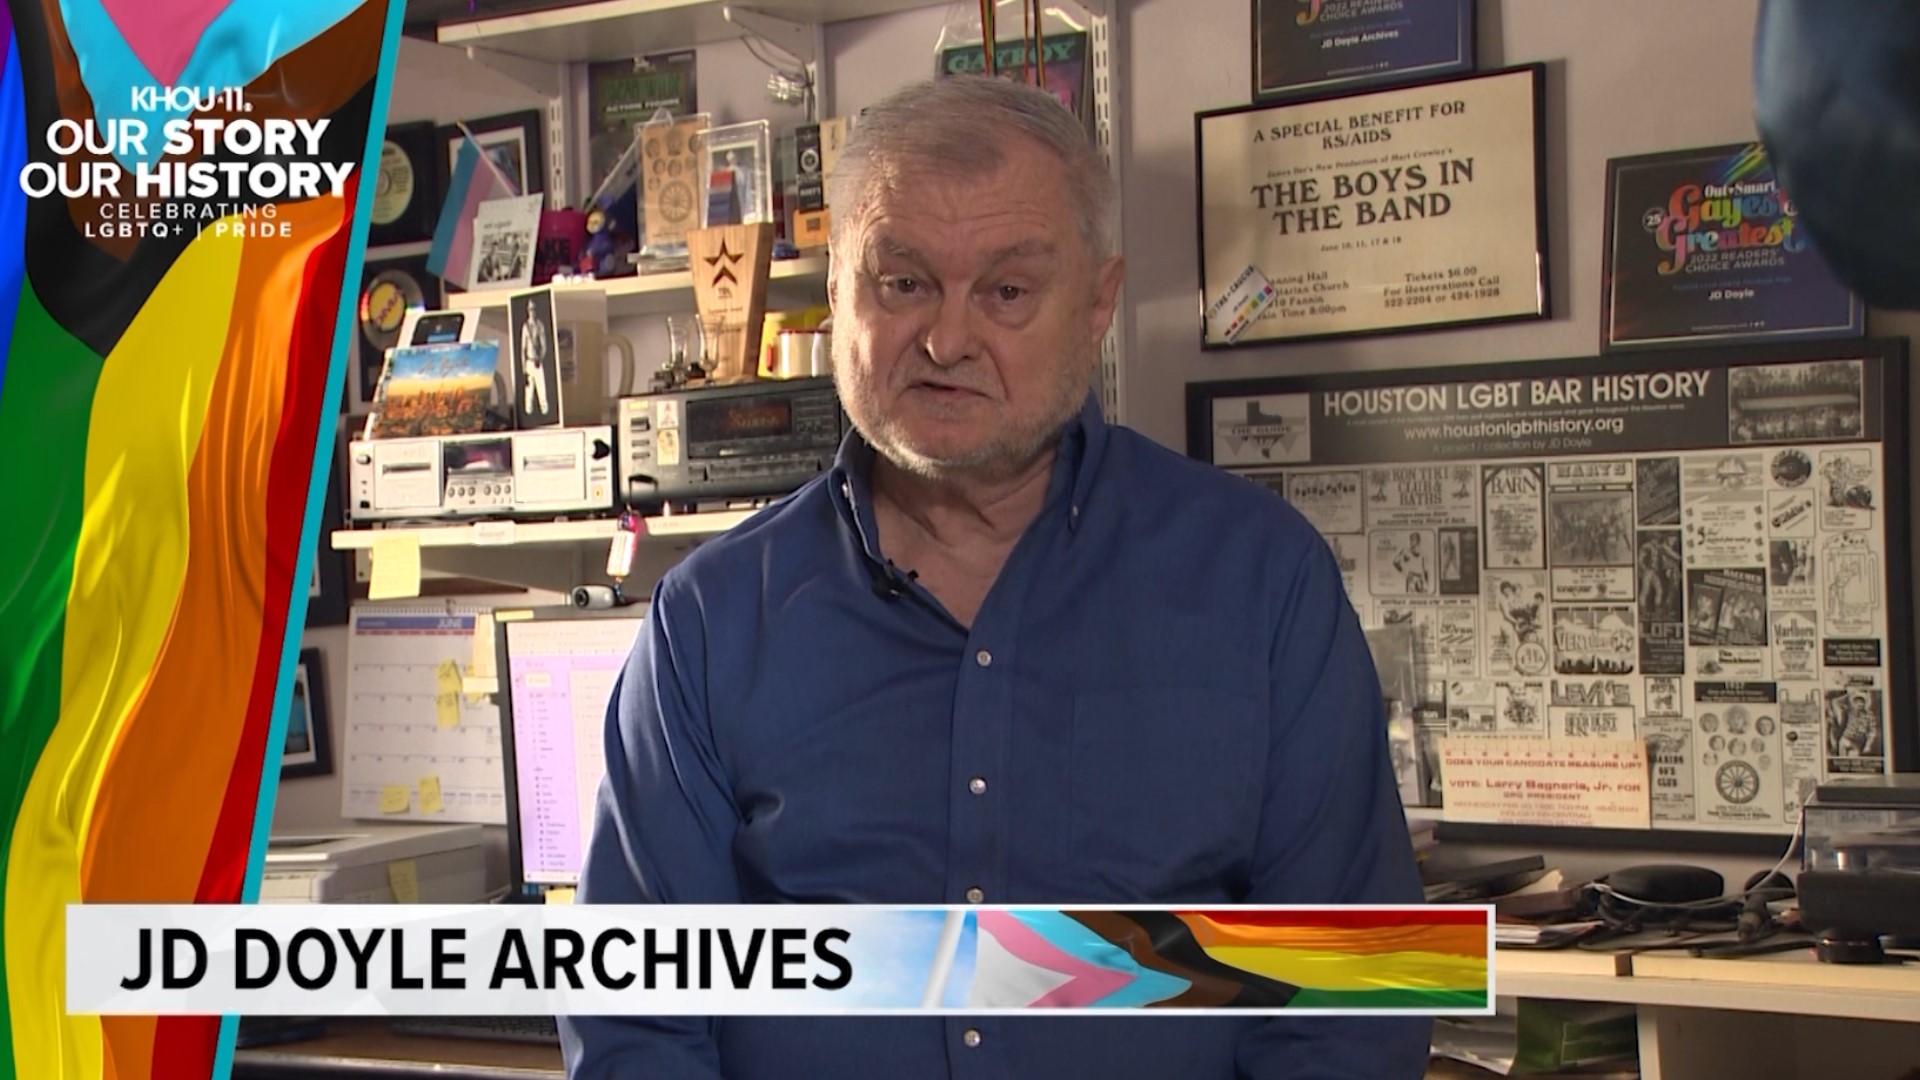 In 2015 he founded the JD Doyle Archives and it's evolved into what it is today.